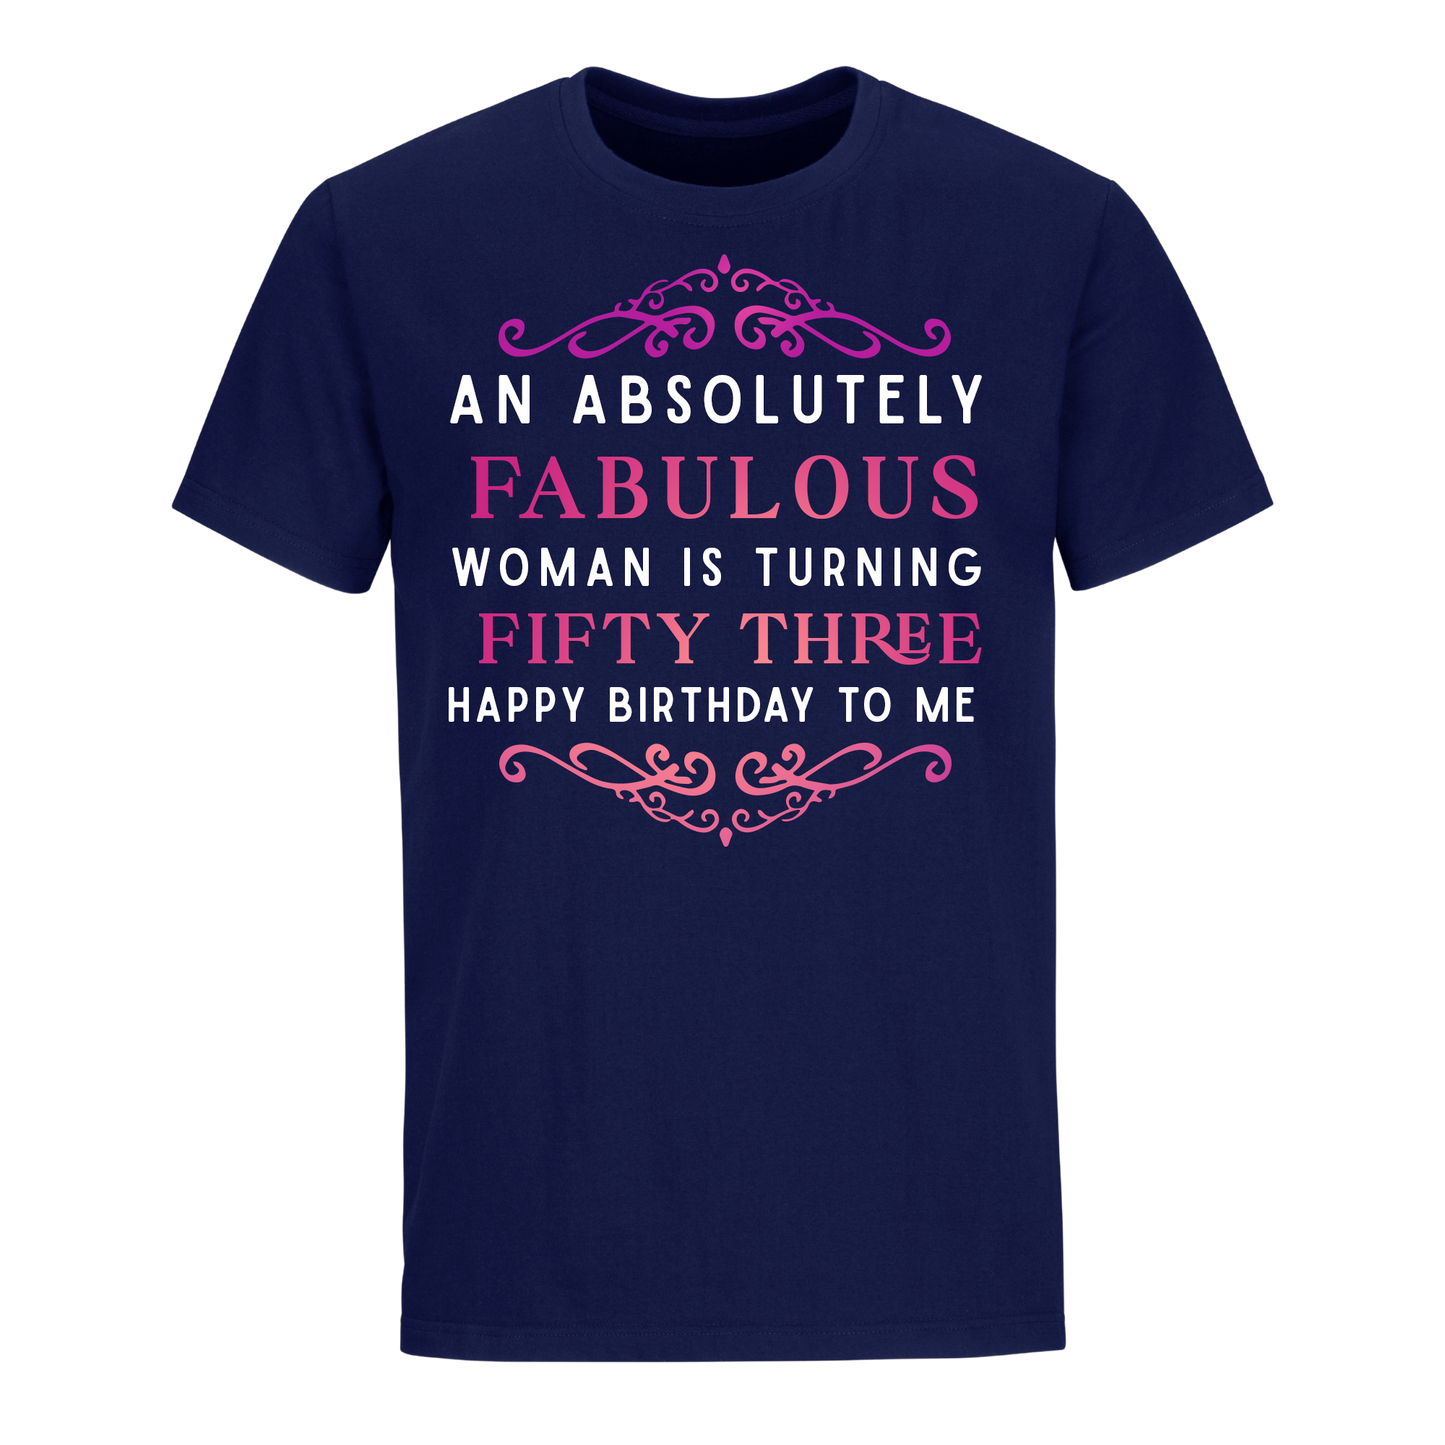 ABSOLUTELY FAB FIFTY THREE UNISEX SHIRT